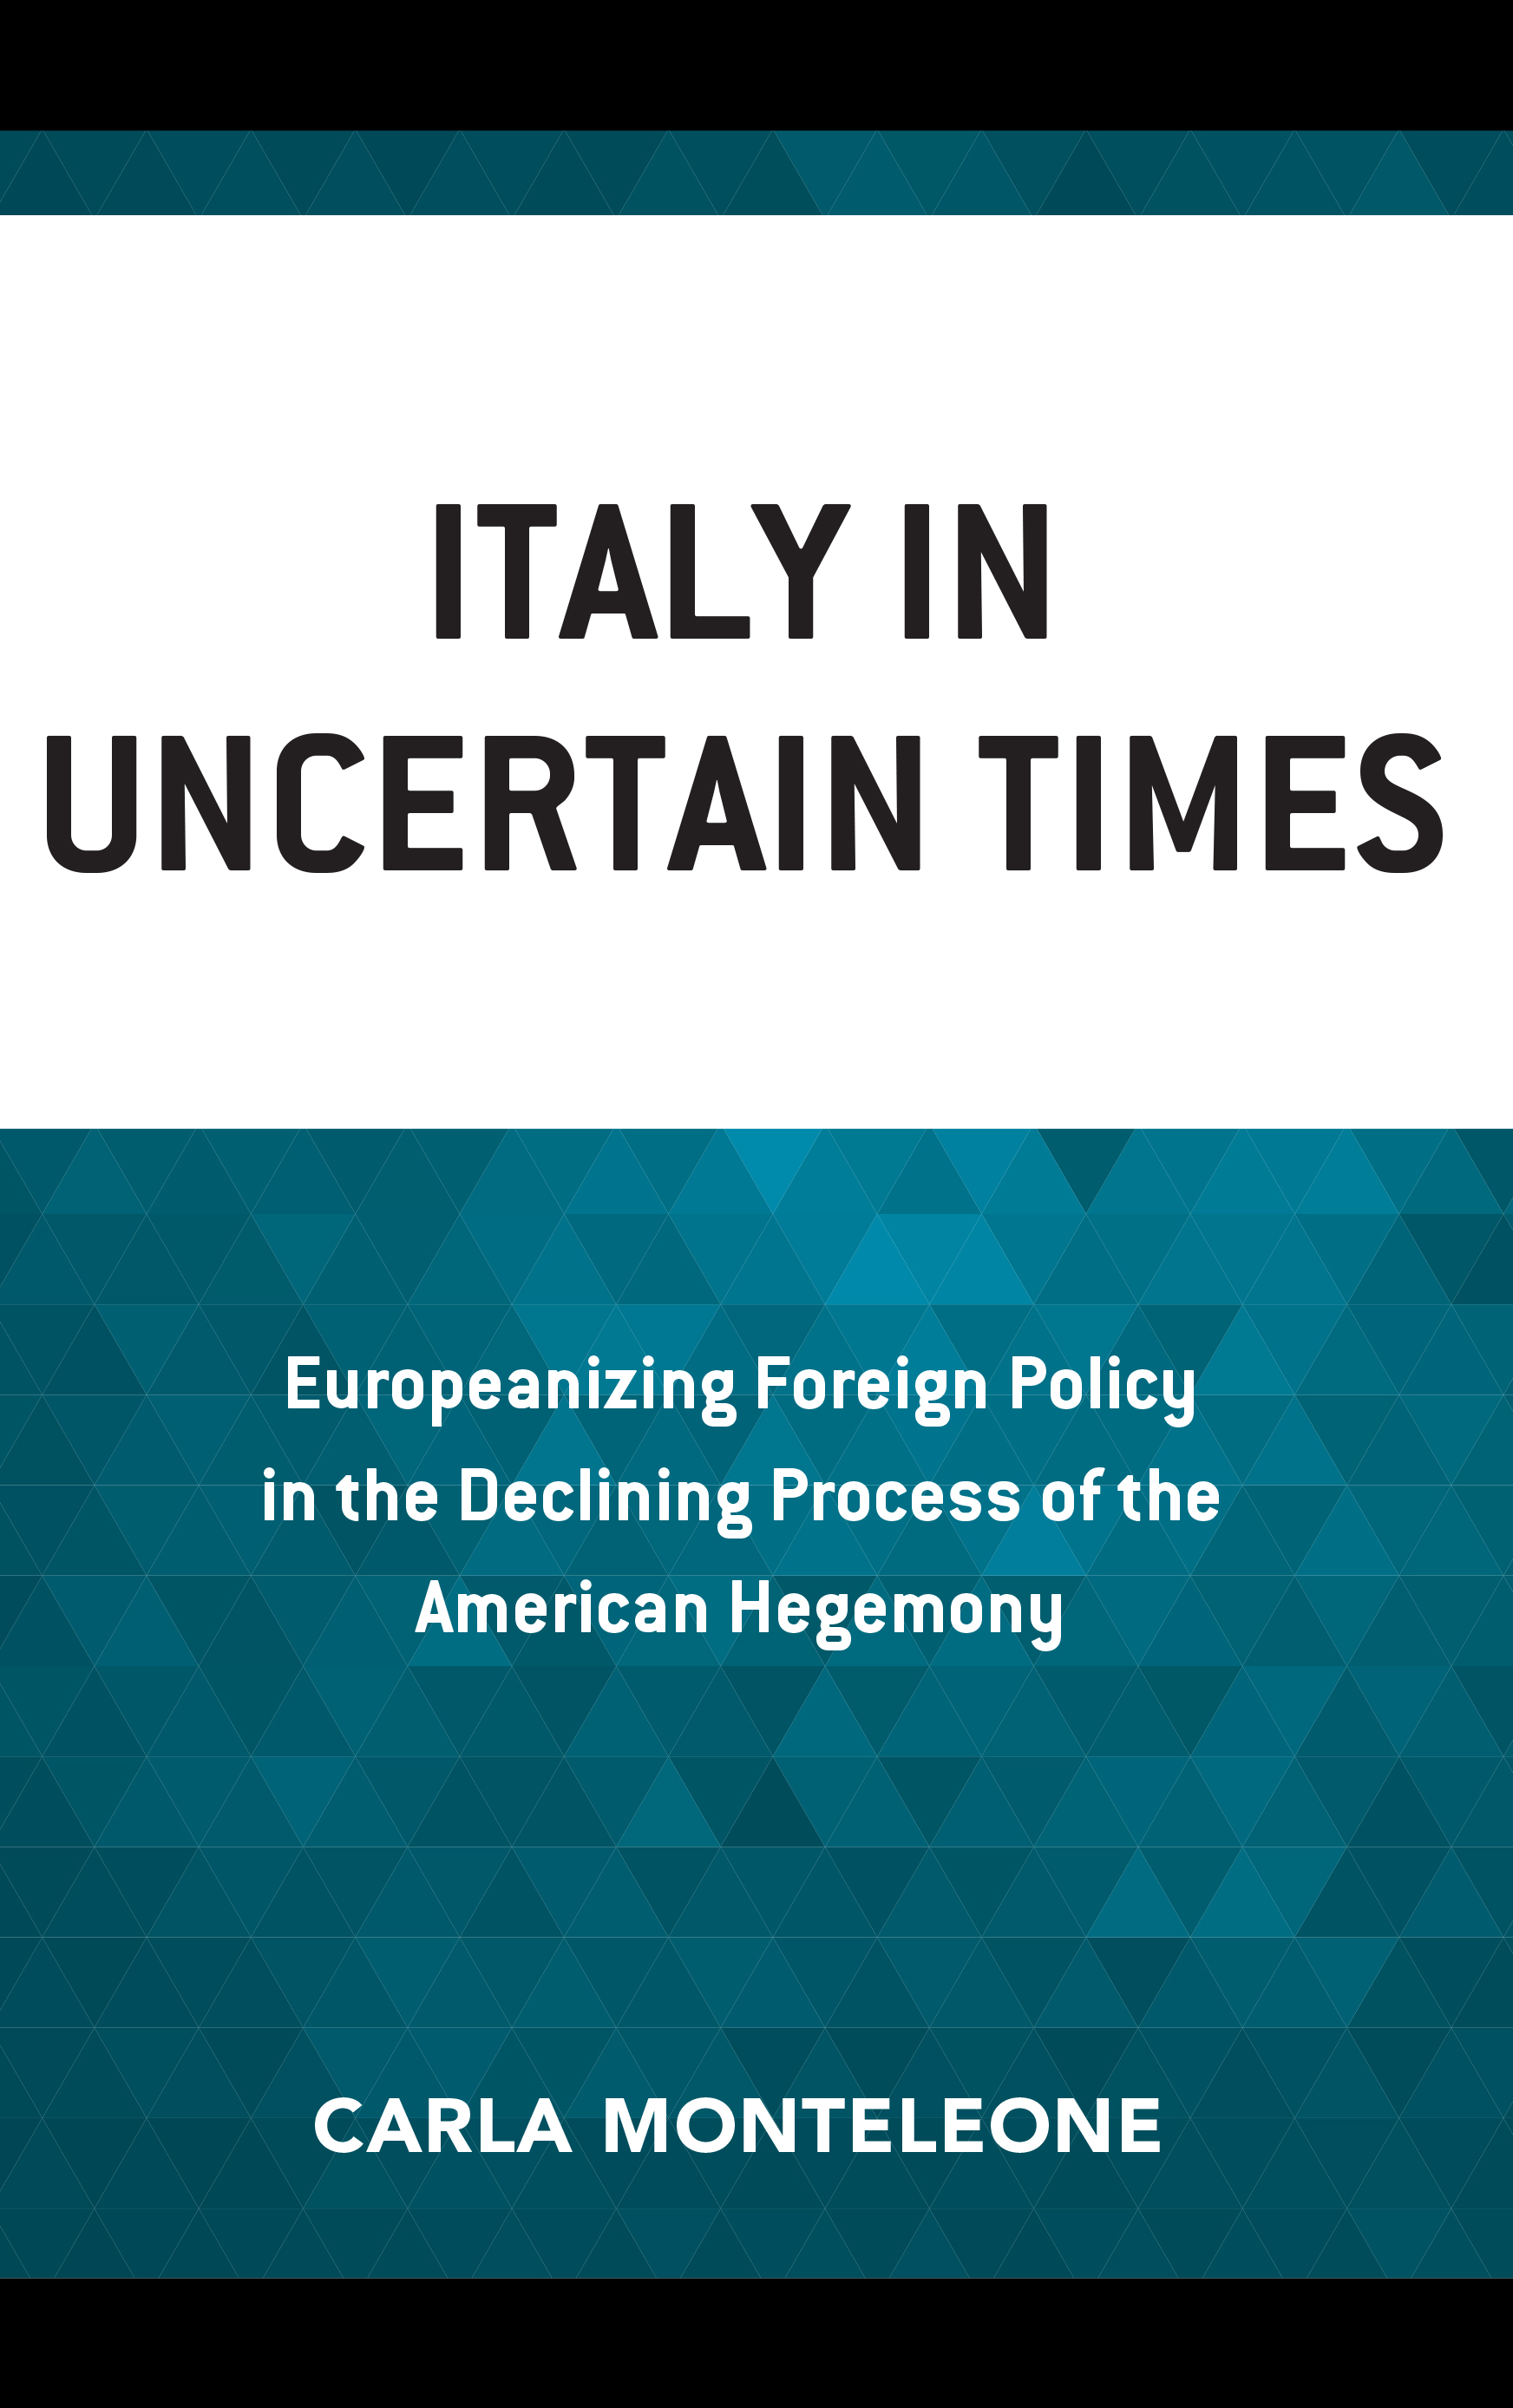 Italy in Uncertain Times: Europeanizing Foreign Policy in the Declining Process of the American Hegemony